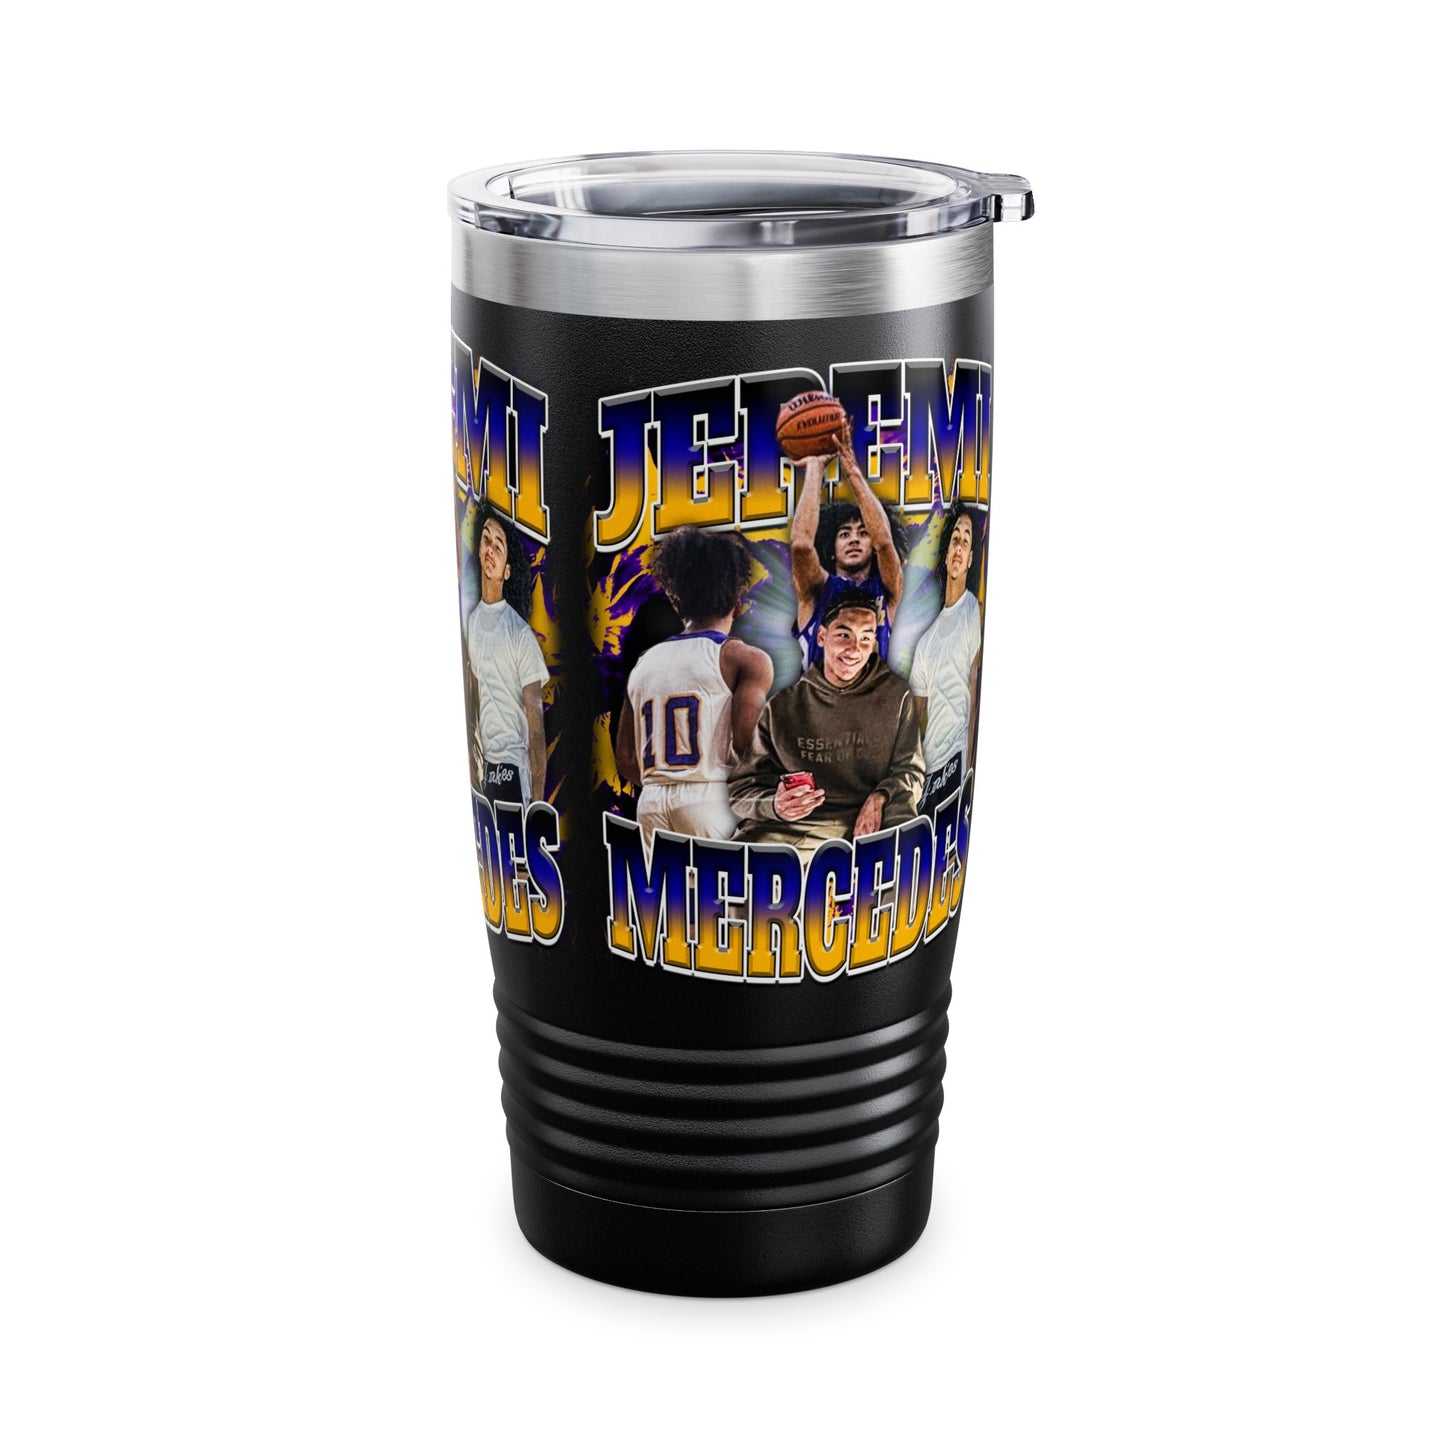 Jeremi Mercedes Stainless Steal Tumbler